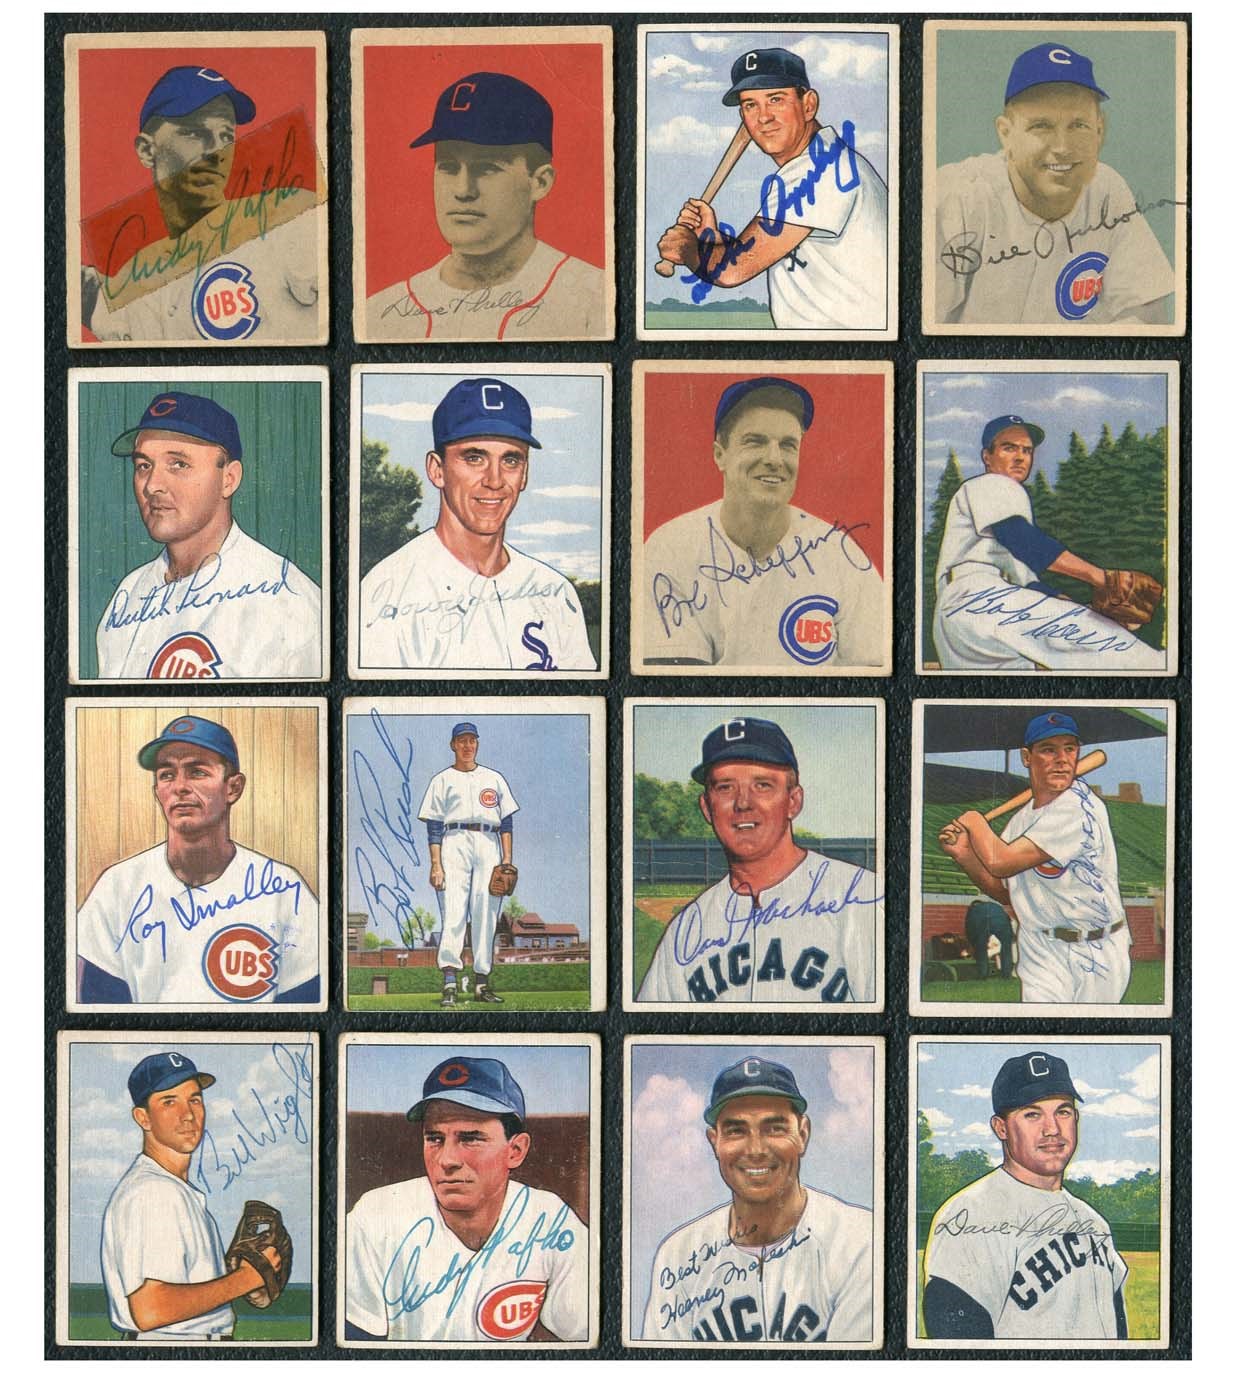 Baseball Autographs - 1933-52 Chicago Cubs & White Sox Goudey, Diamond Star & Bowman Signed Card Collection (101)